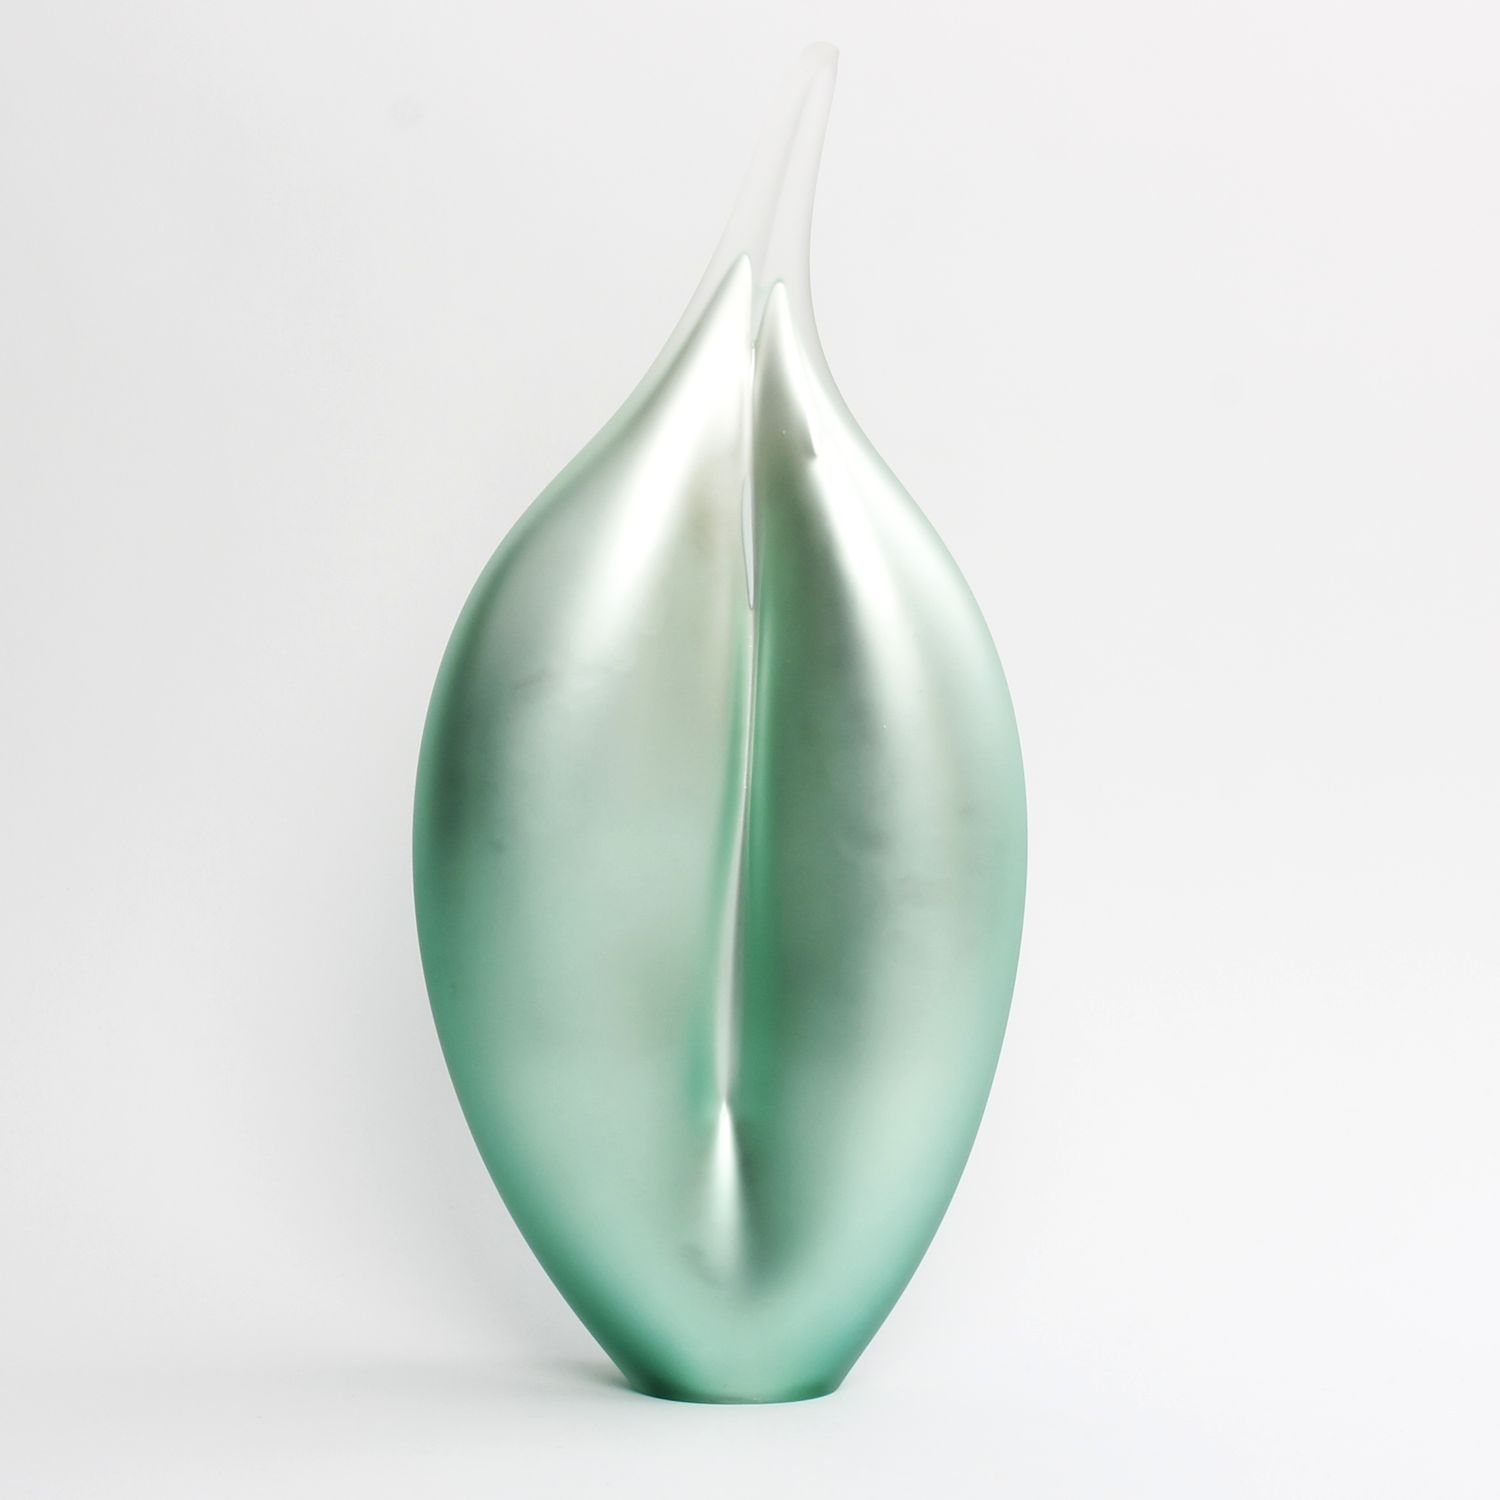 Soffi Studio: Large Green Flame Product Image 1 of 2